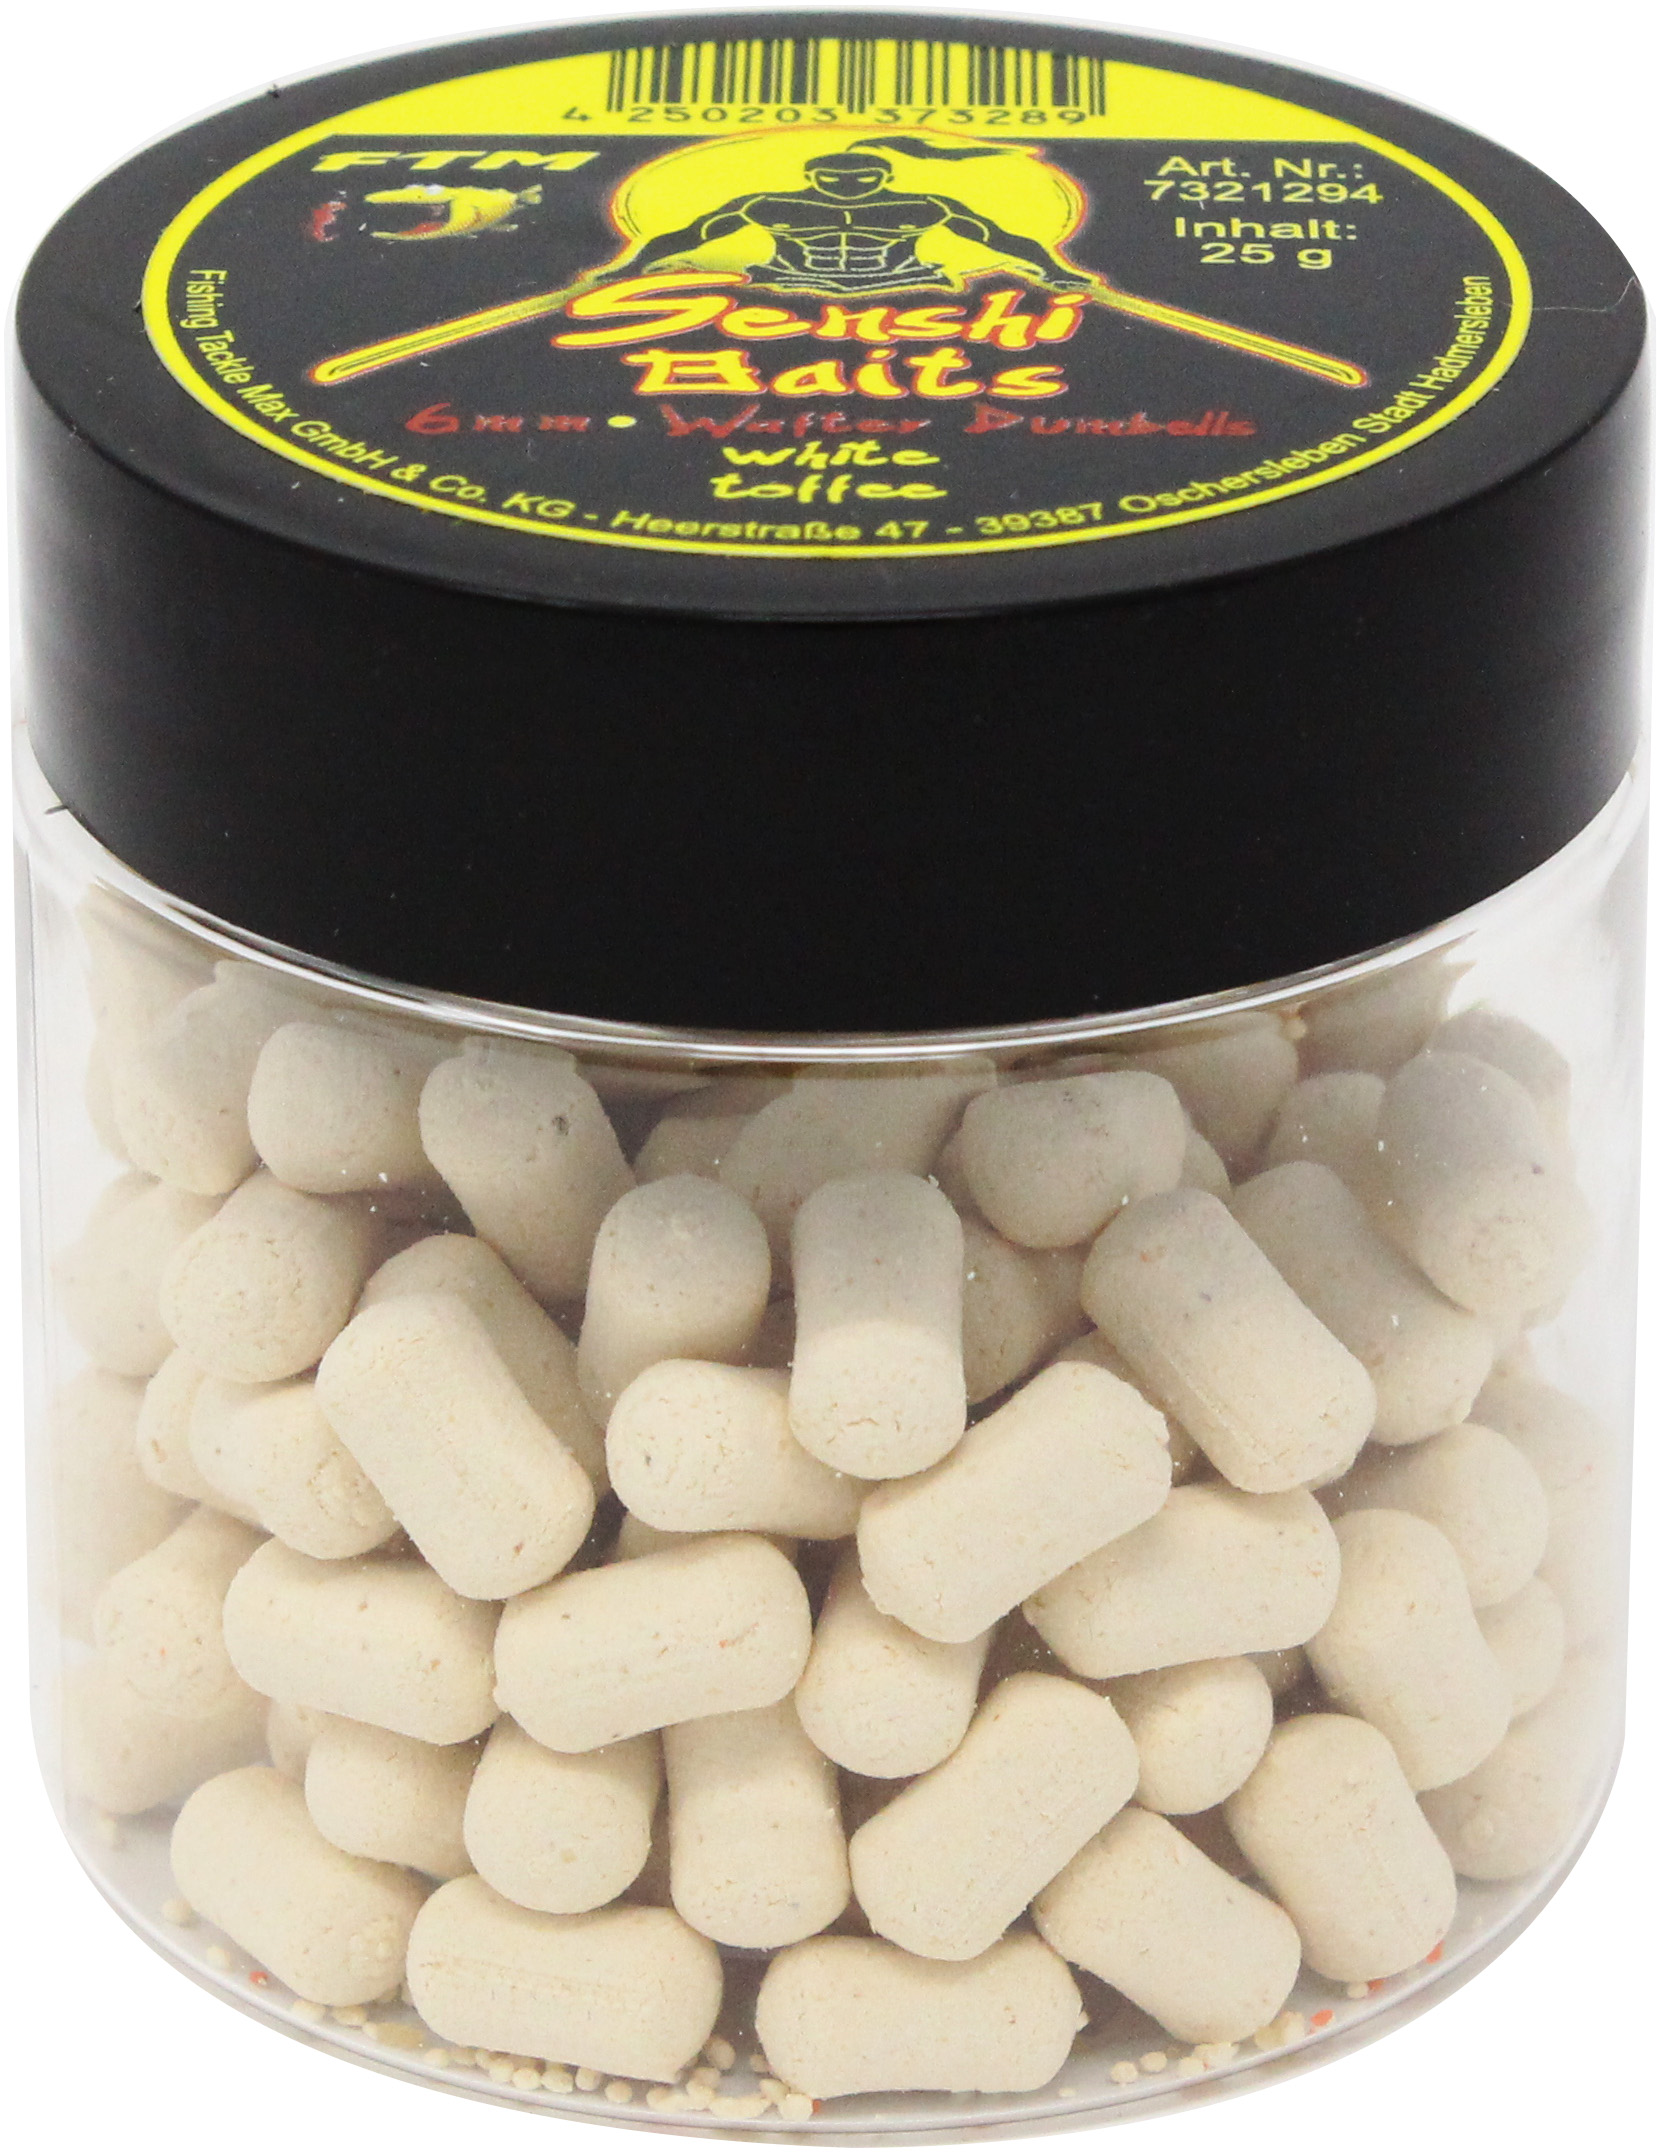 7321294_-_00_Senshi_Baits_Wafter_Dumbells_White_Toffee_6mm_verpackt